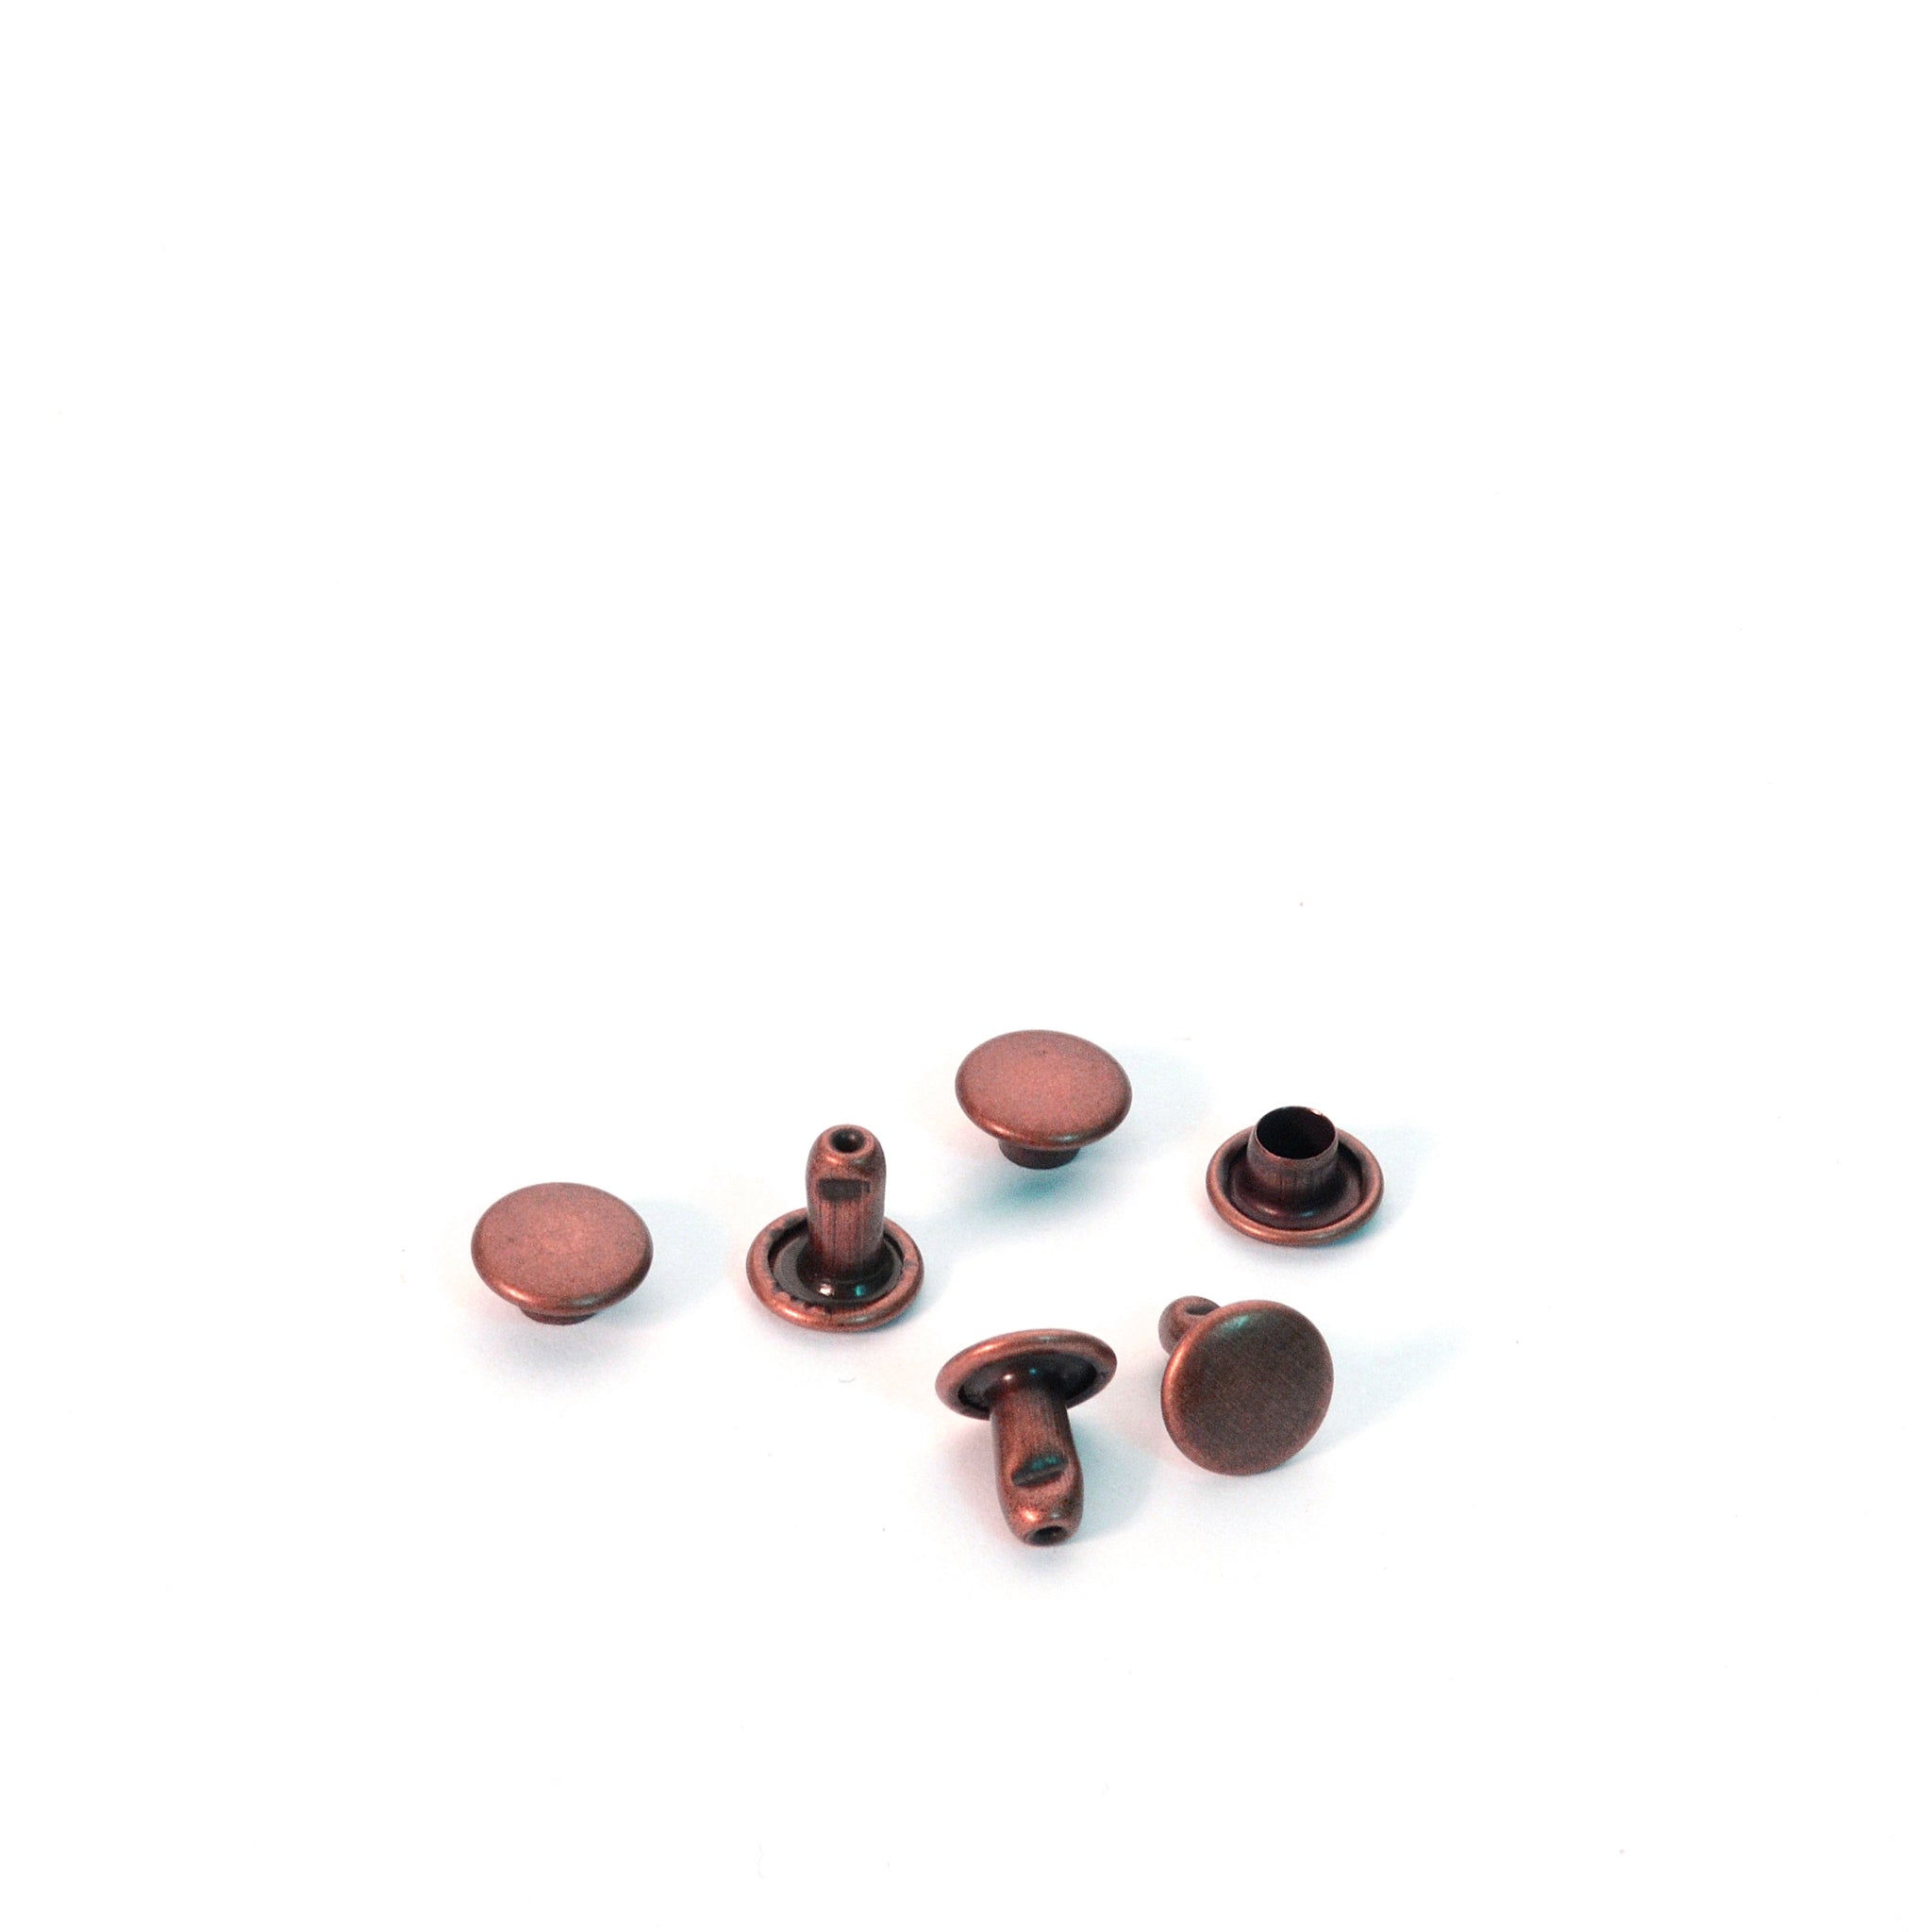 Small Antique Copper Double Cap Rivets from Identity Leathercraft